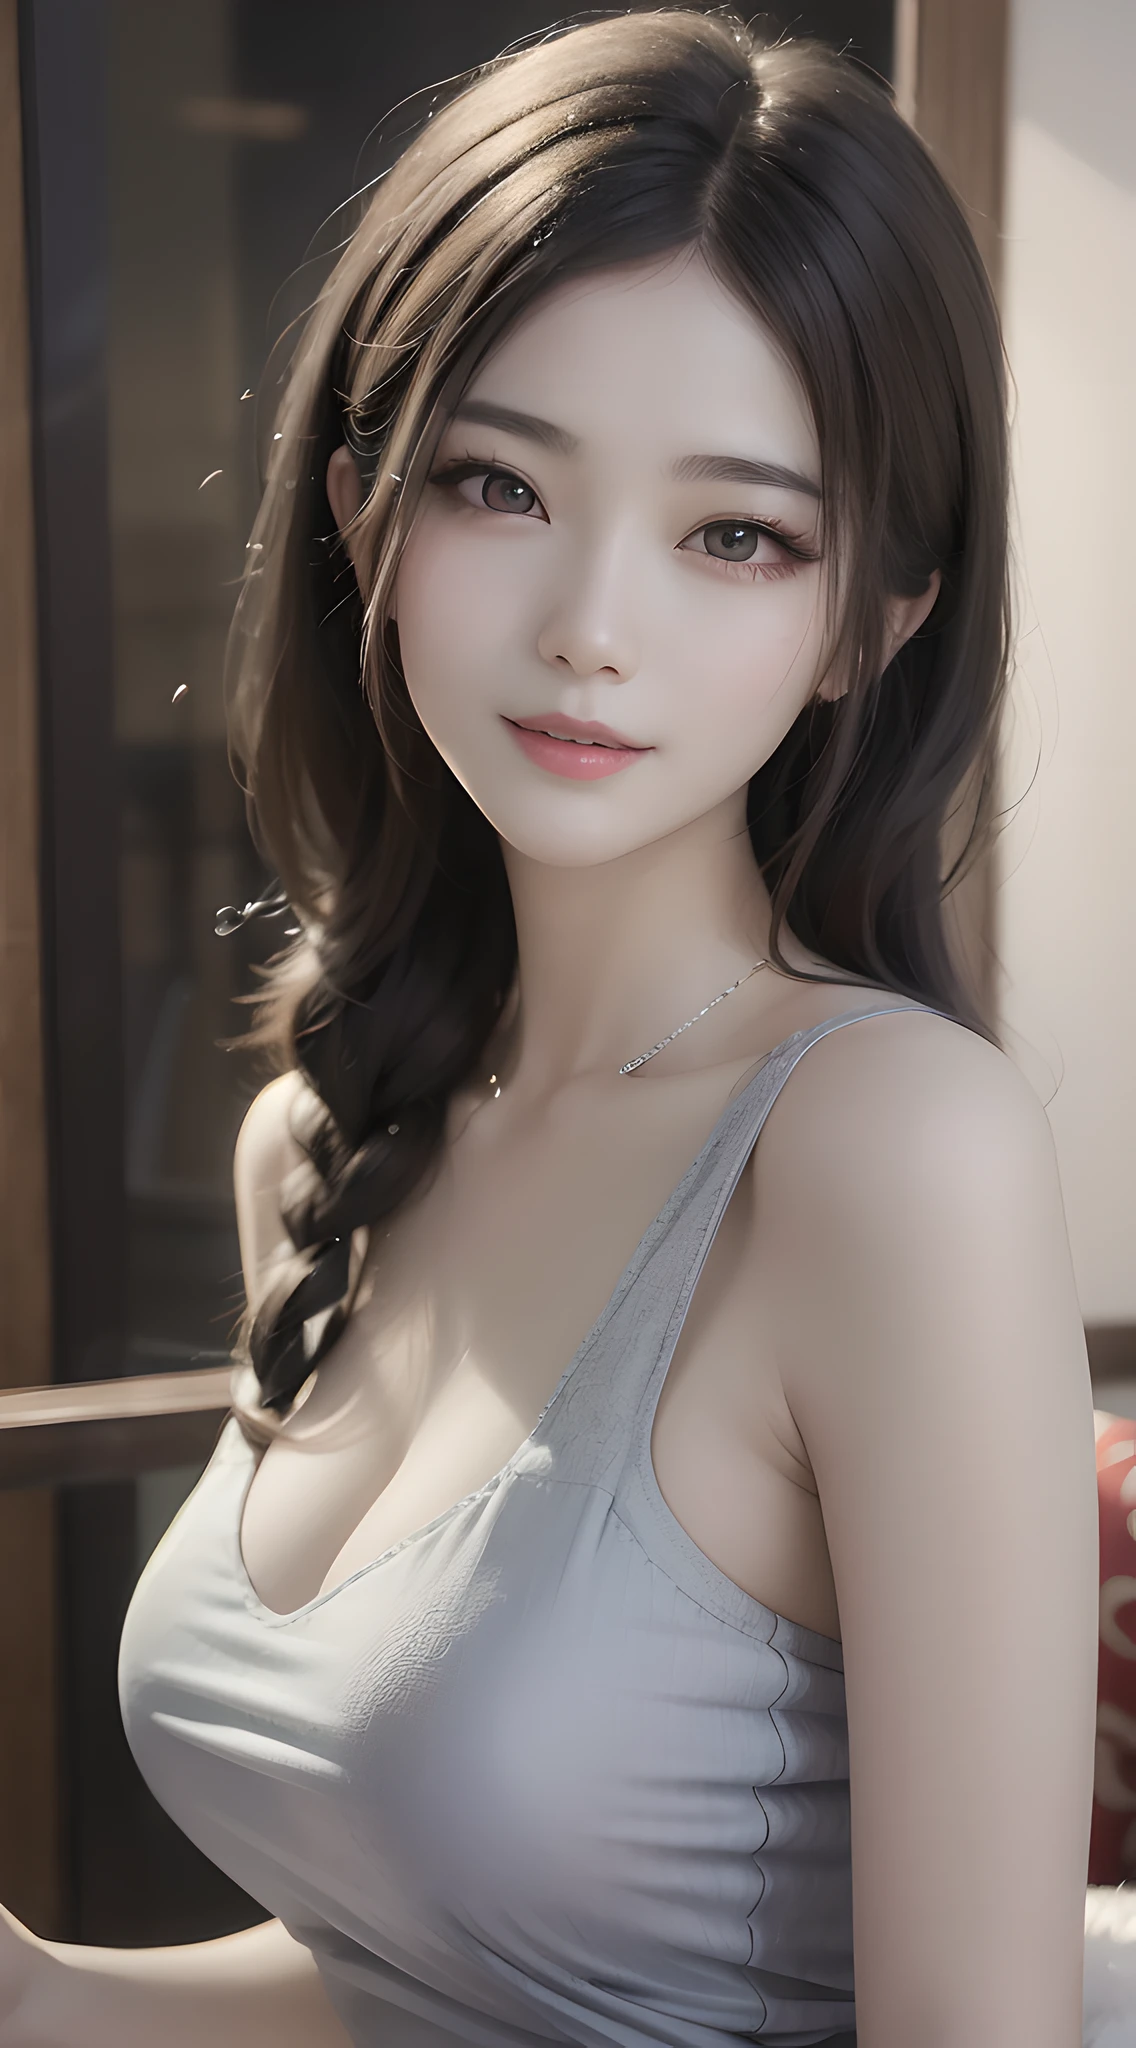 araffe asian woman with long hair and a gray tank top, gorgeous chinese model, gorgeous young korean woman, beautiful asian girl, lovely delicate face, pale milky white porcelain skin, friendly seductive smile, beautiful south korean woman, cute seductive smile, beautiful young korean woman, korean girl, japanese goddess, beautiful soft lighting, tall thin beautiful goddess